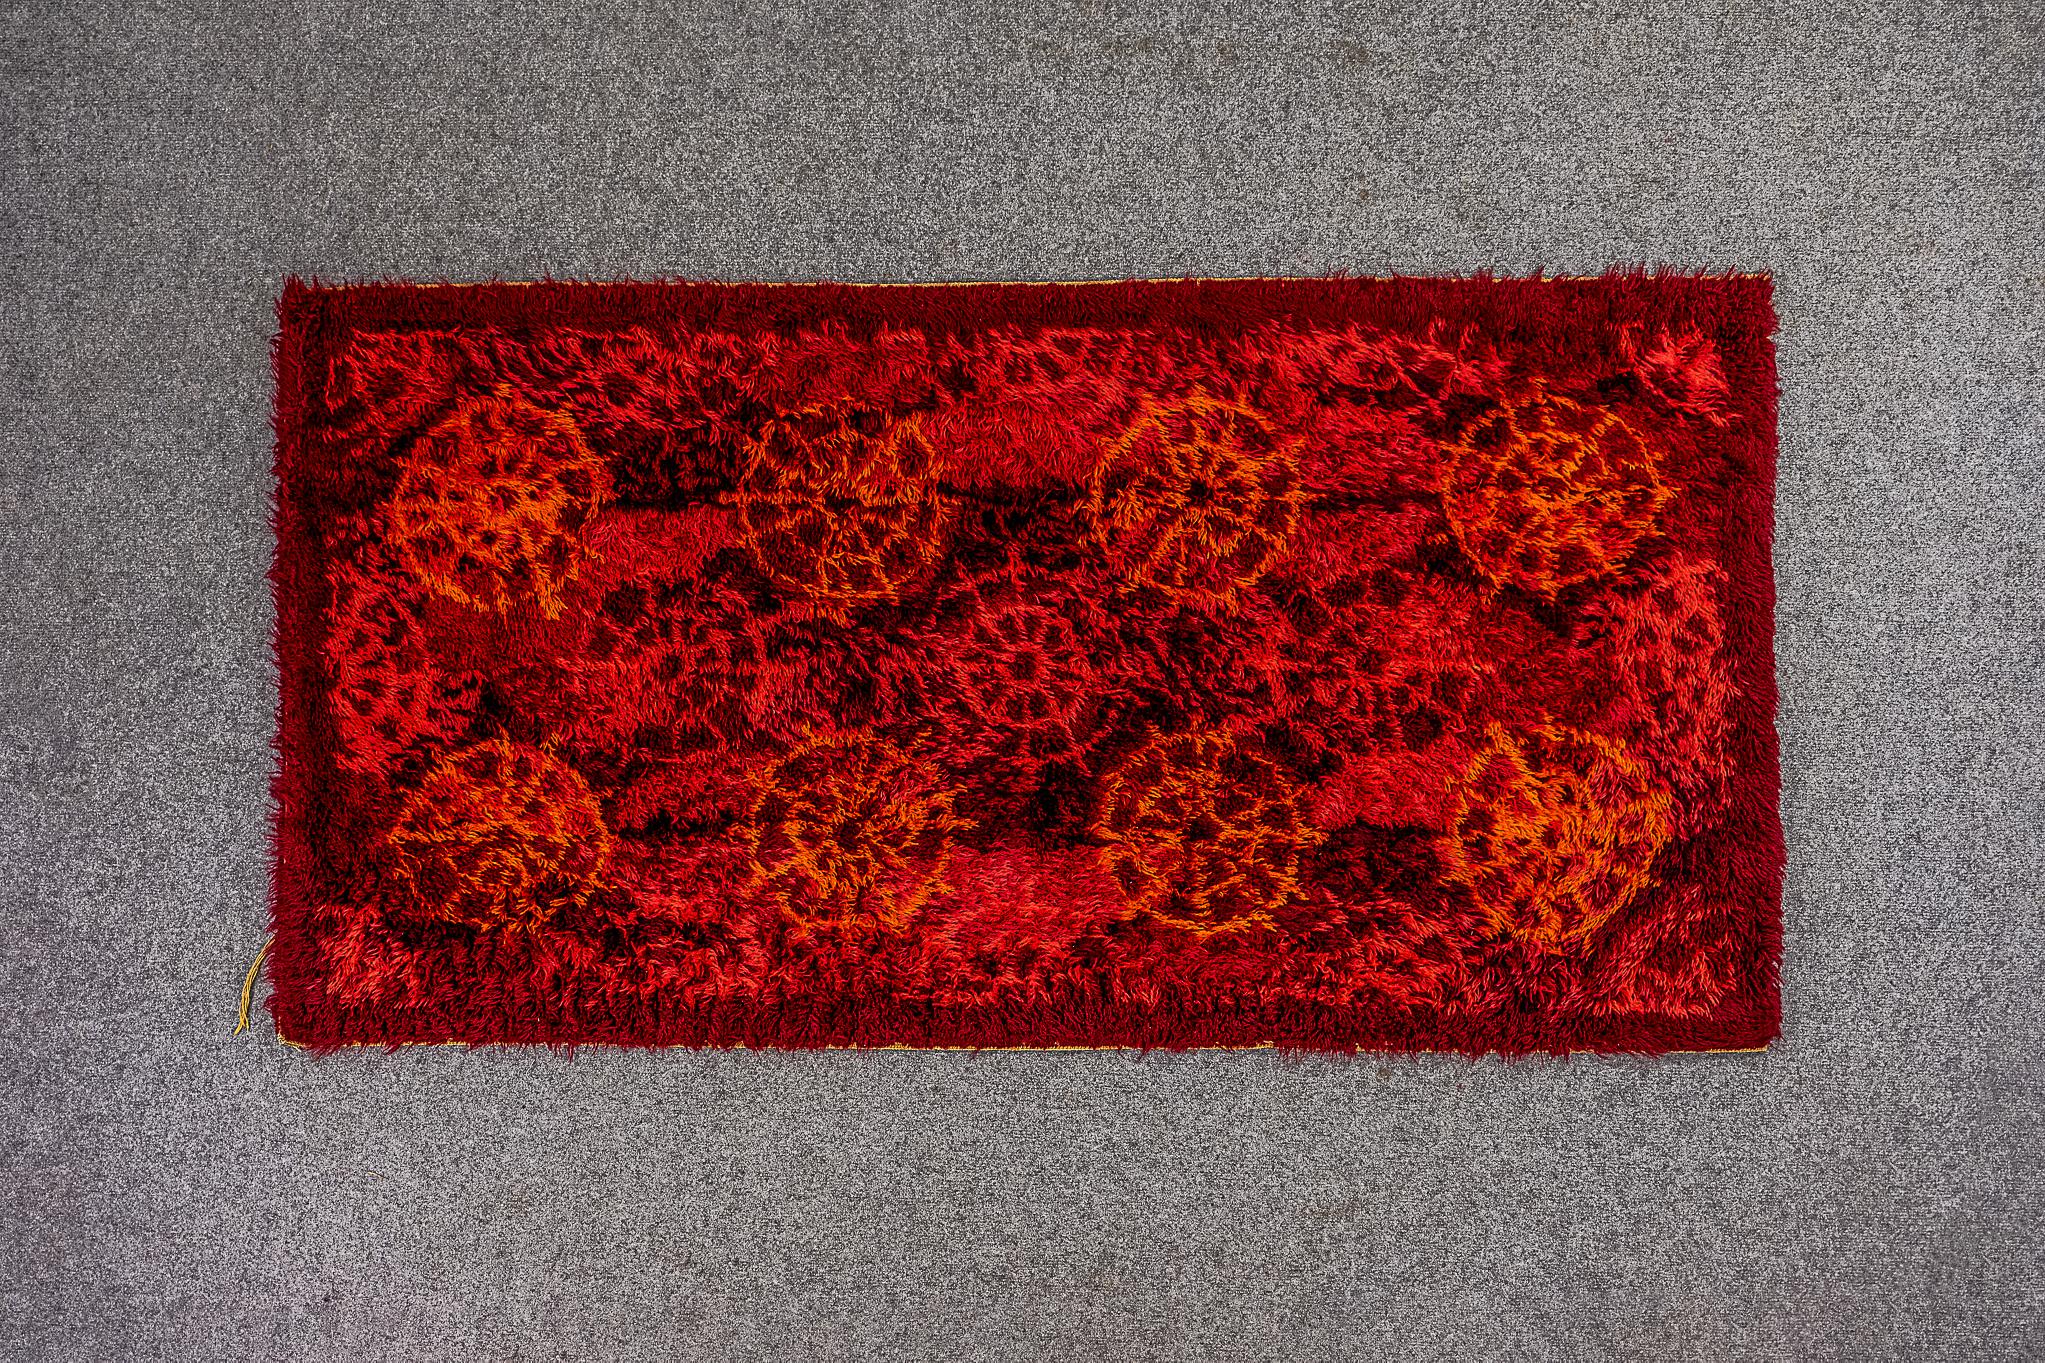 Wool Scandinavian rug, circa 1960's. Bright, striking rug can be used as a wall covering or floor carpet. Carpet depicts an rhythmic abstract wheel design in a red and maroon colour scheme. Nice vintage condition, quite plush and vibrant with a bit